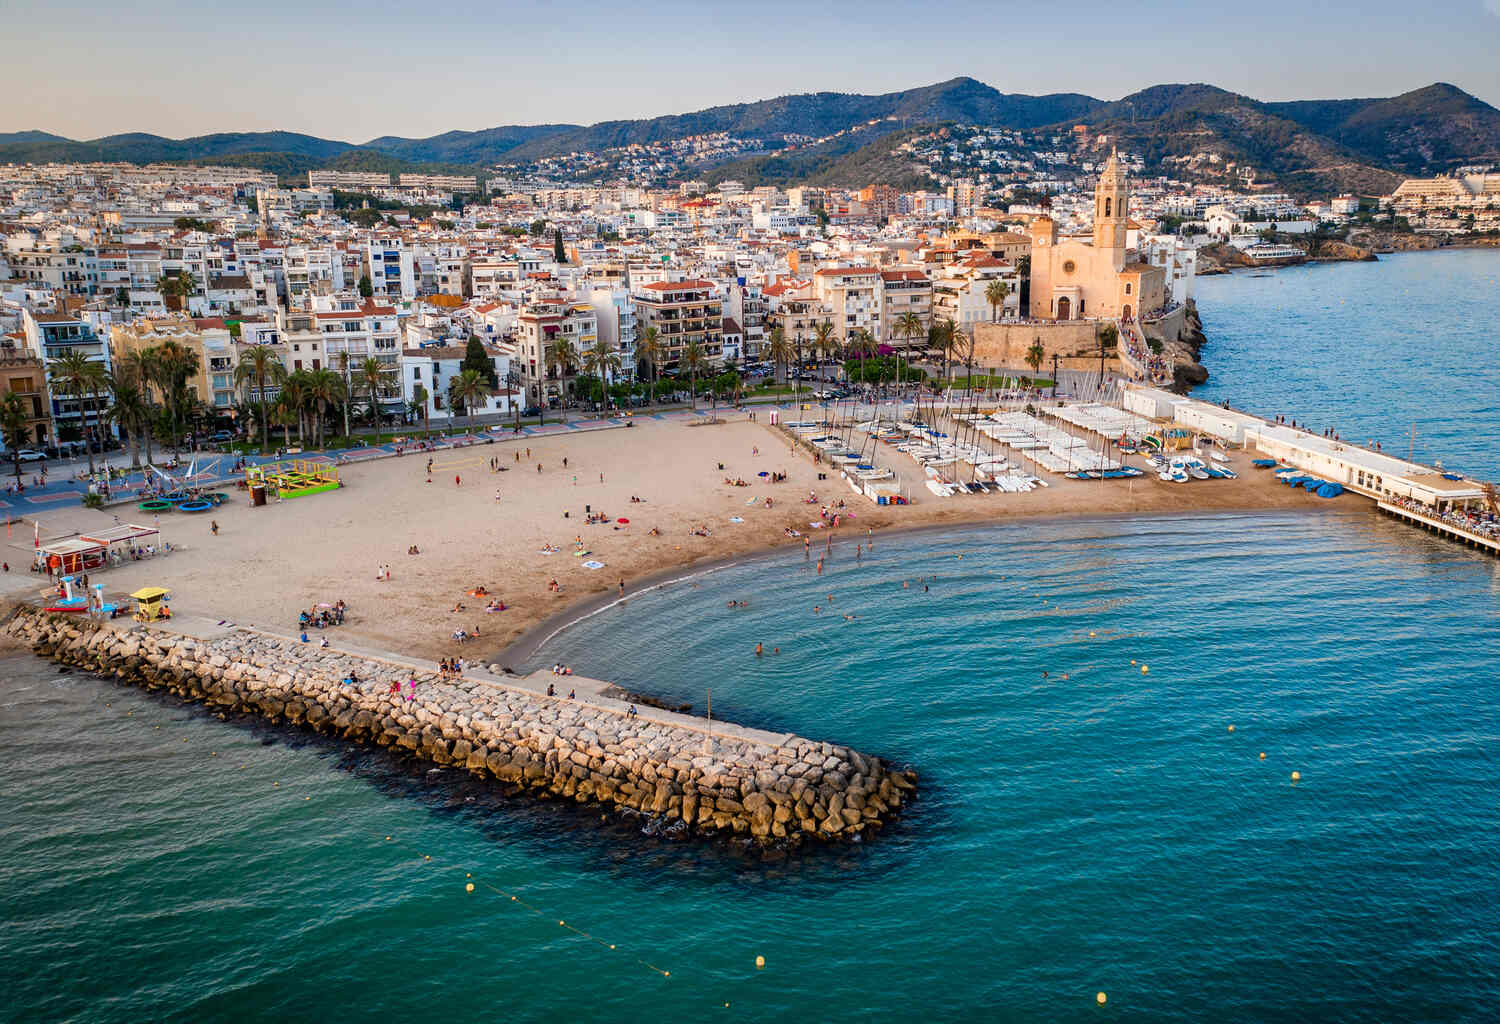 Curved beach of Sant Feliu de Guíxols in Spain, with clear waters and a view of the town.